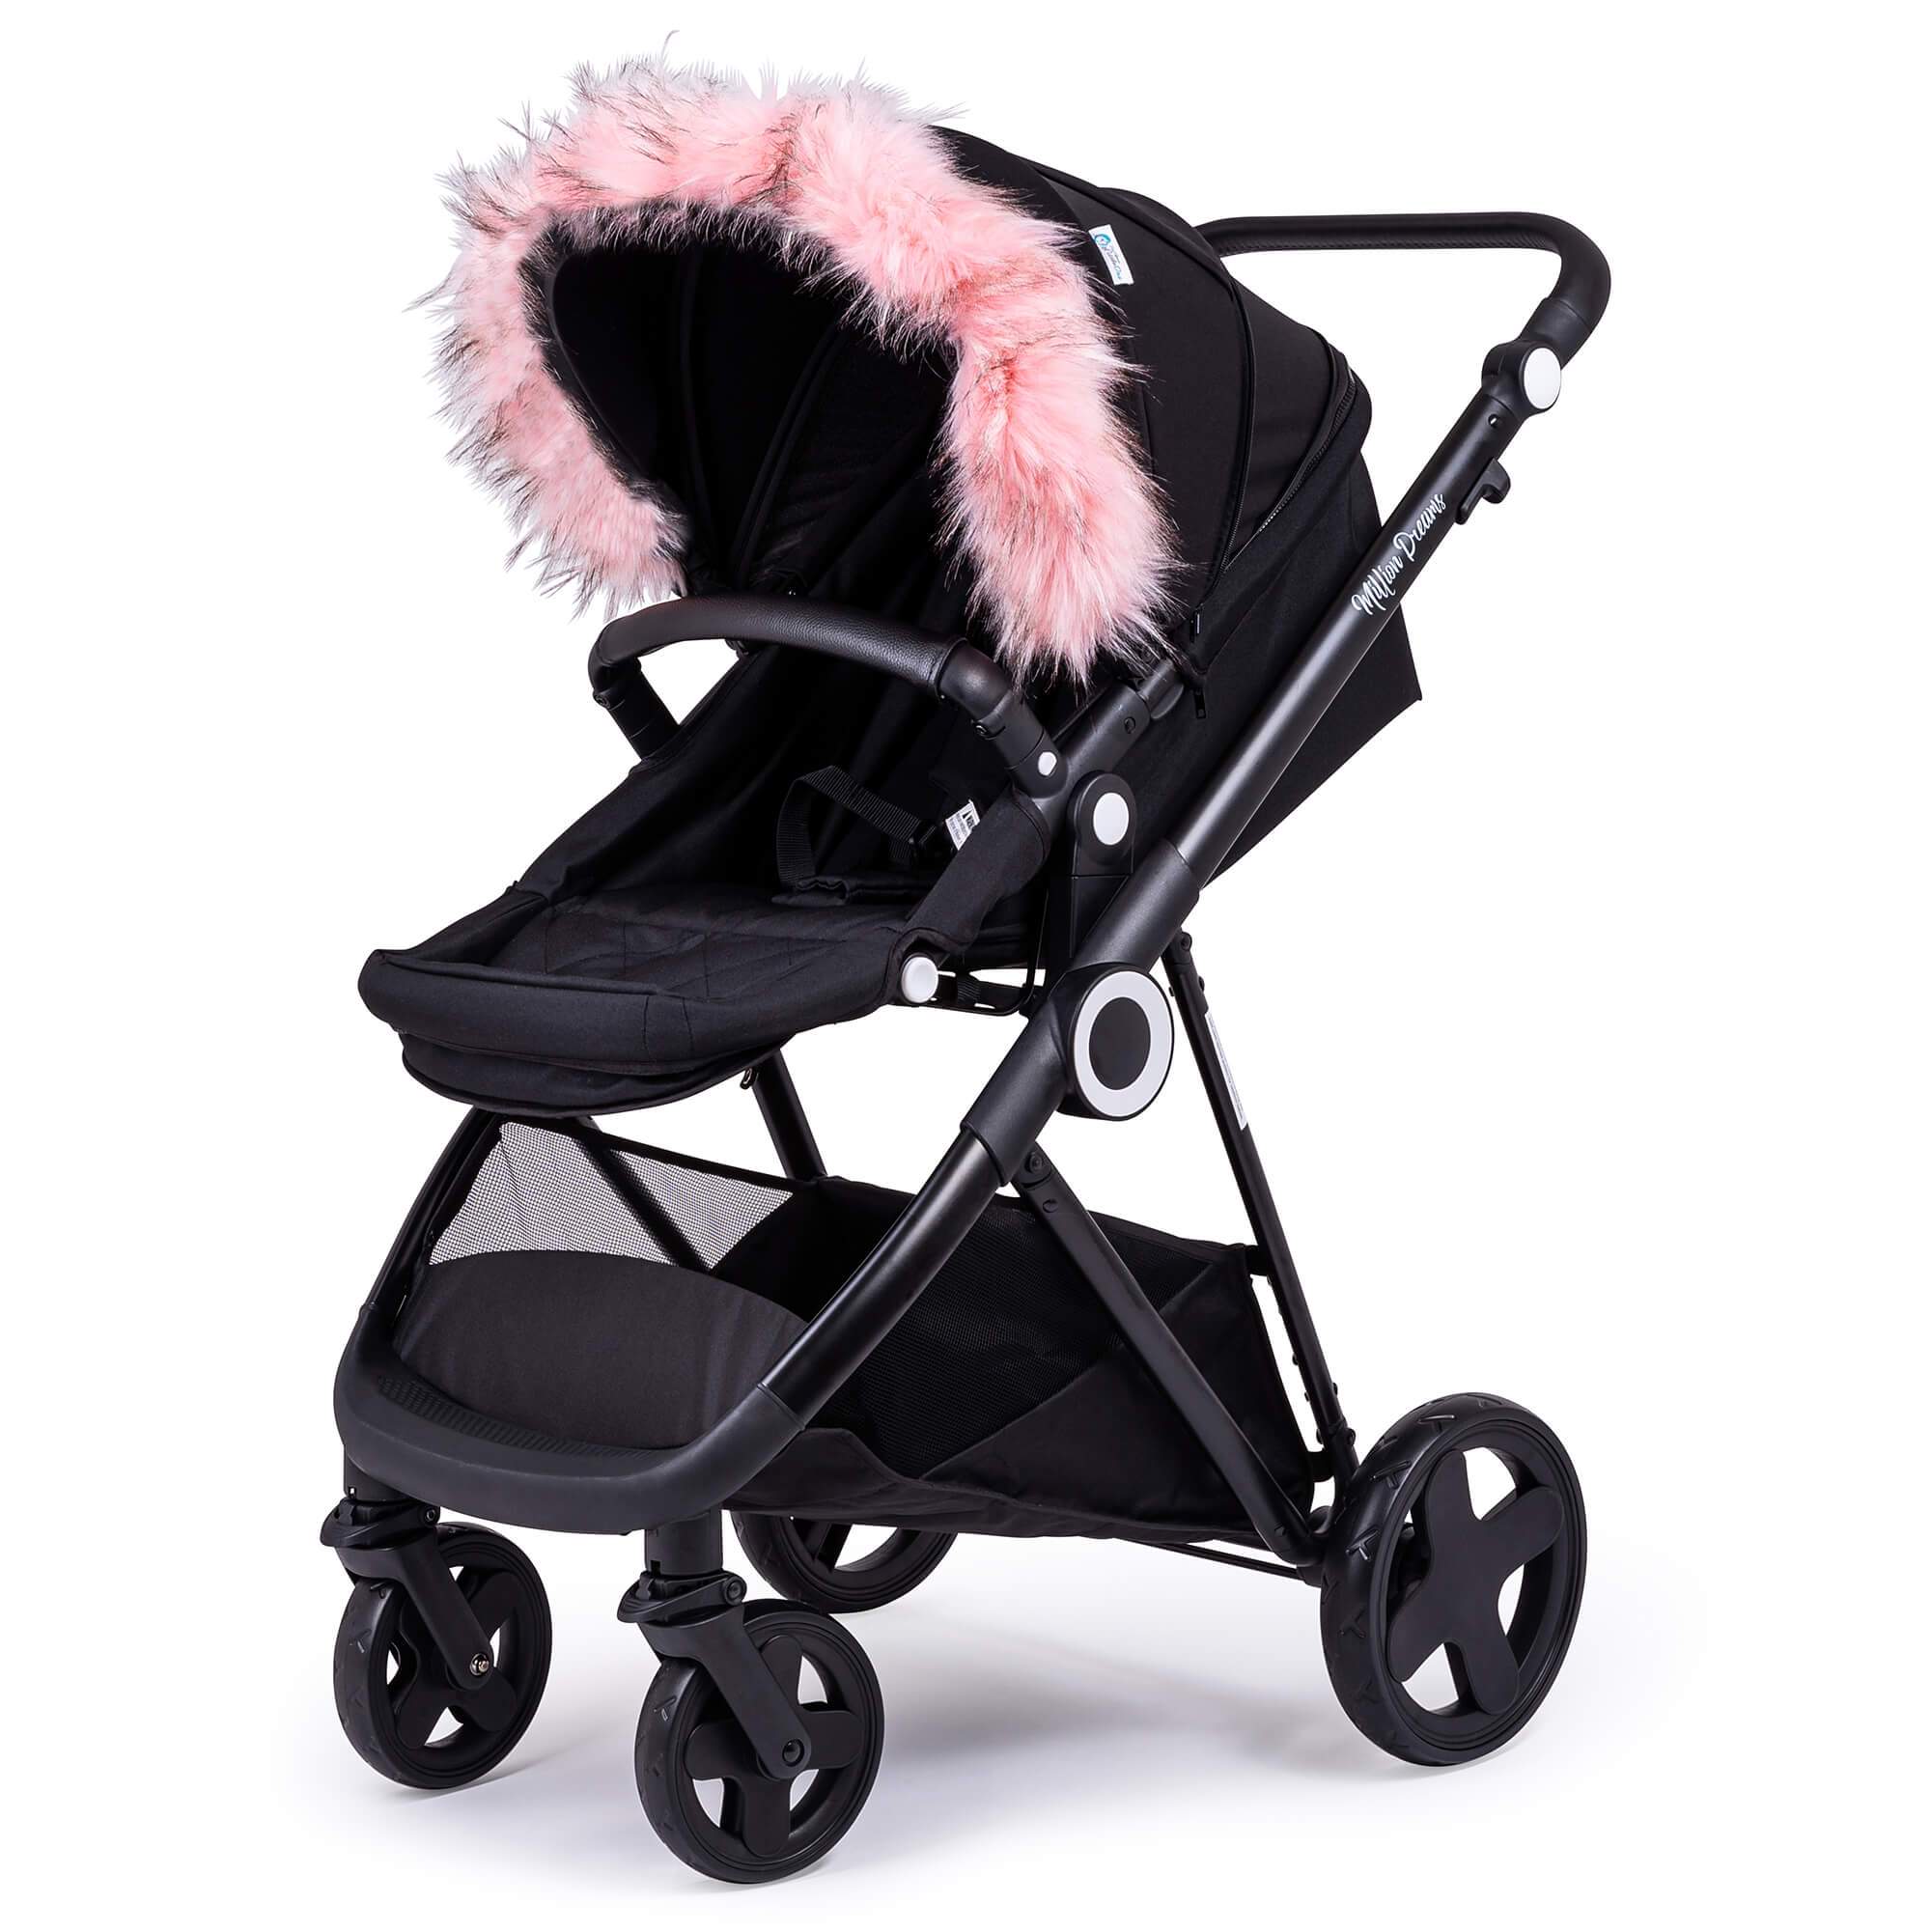 Pram Fur Hood Trim Attachment For Pushchair Compatible with Kiddy - Light Pink / Fits All Models | For Your Little One